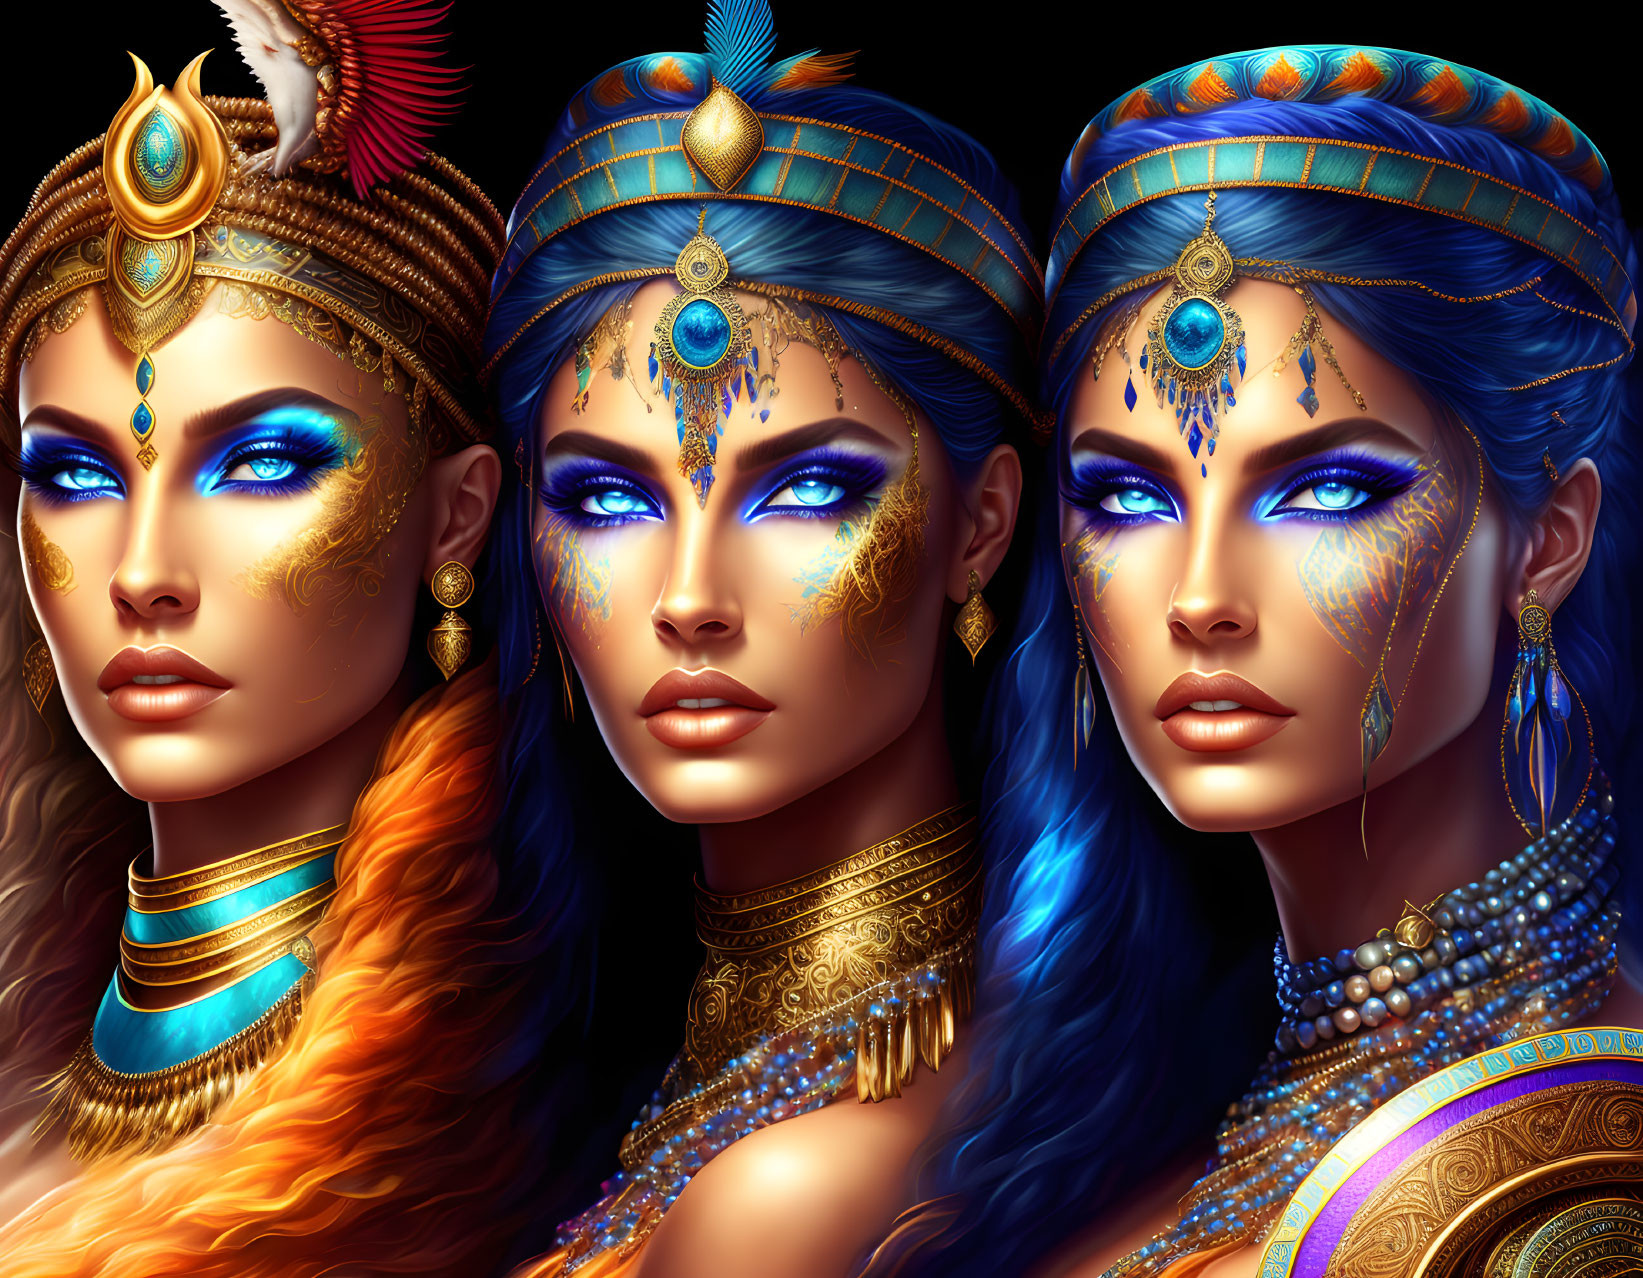 Three women adorned in elaborate golden jewelry and colorful headpieces, showcasing detailed makeup and mystical blue eyes on